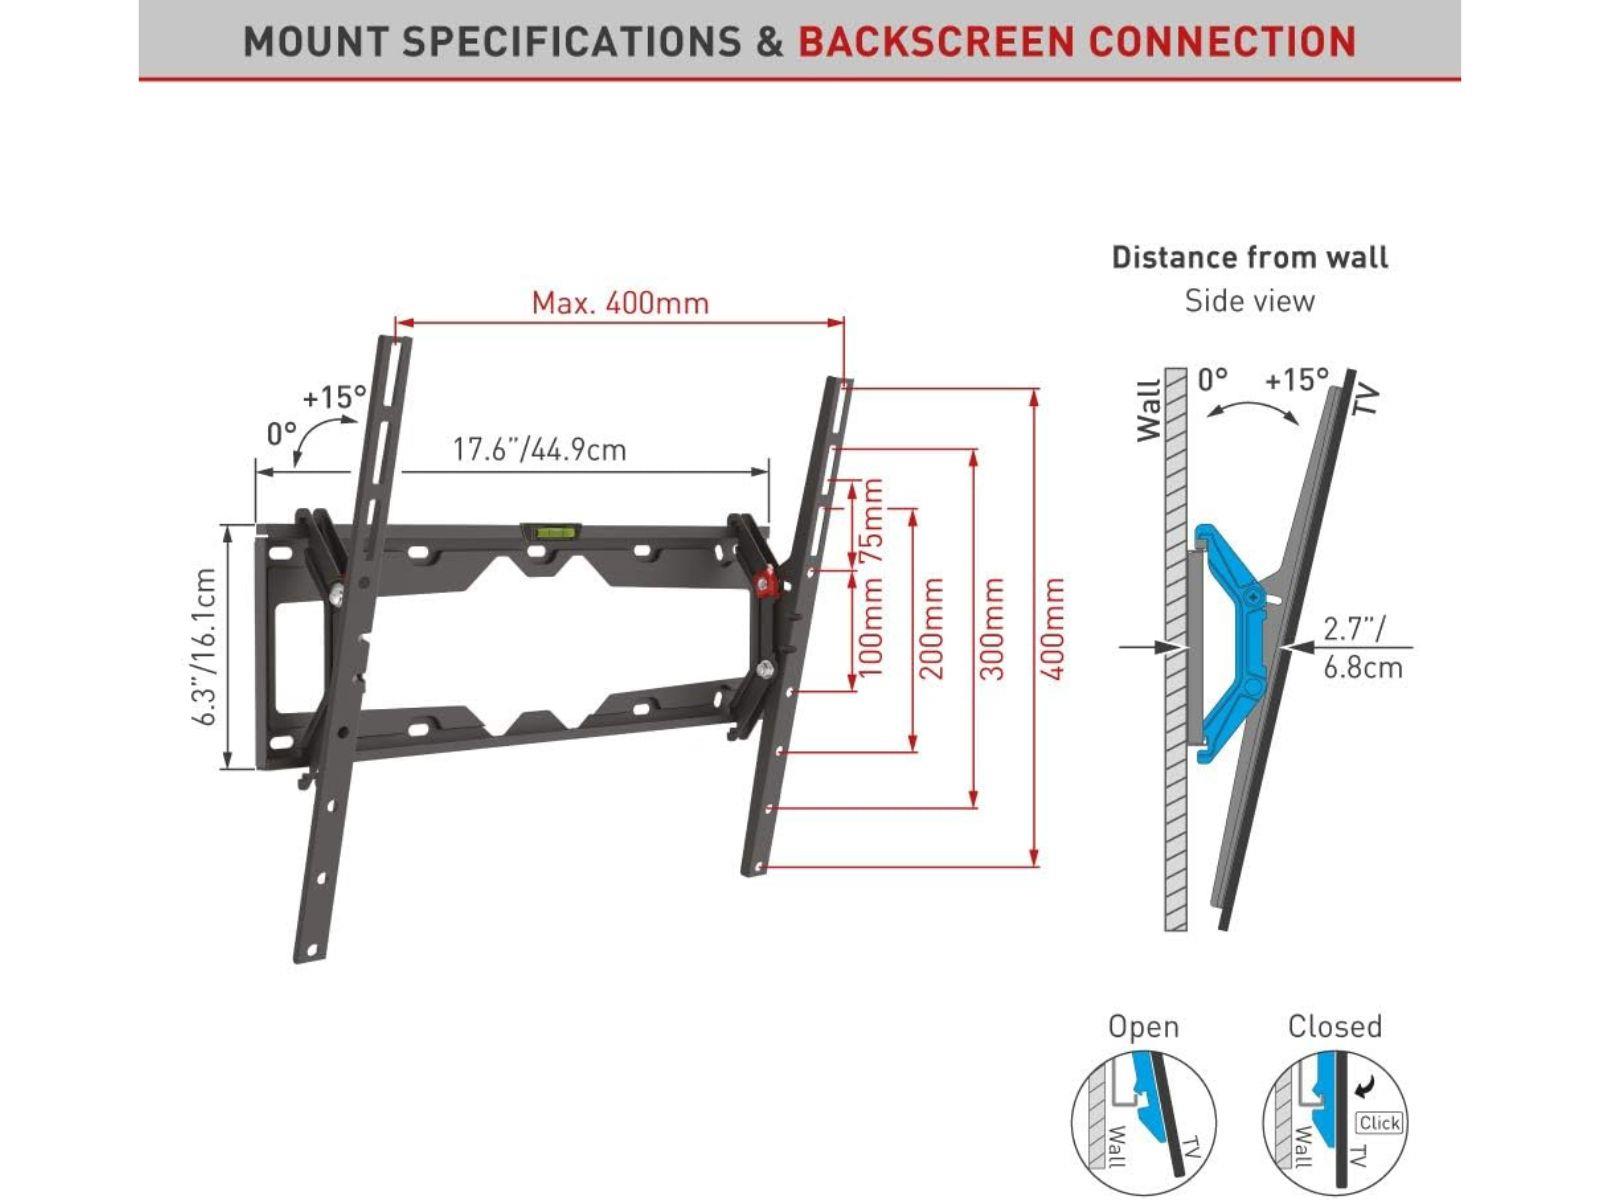 Mount Specifications and backscreen connection information for the TV Tilt Mounting Bracket For 19-65" Flat-Screen TV's